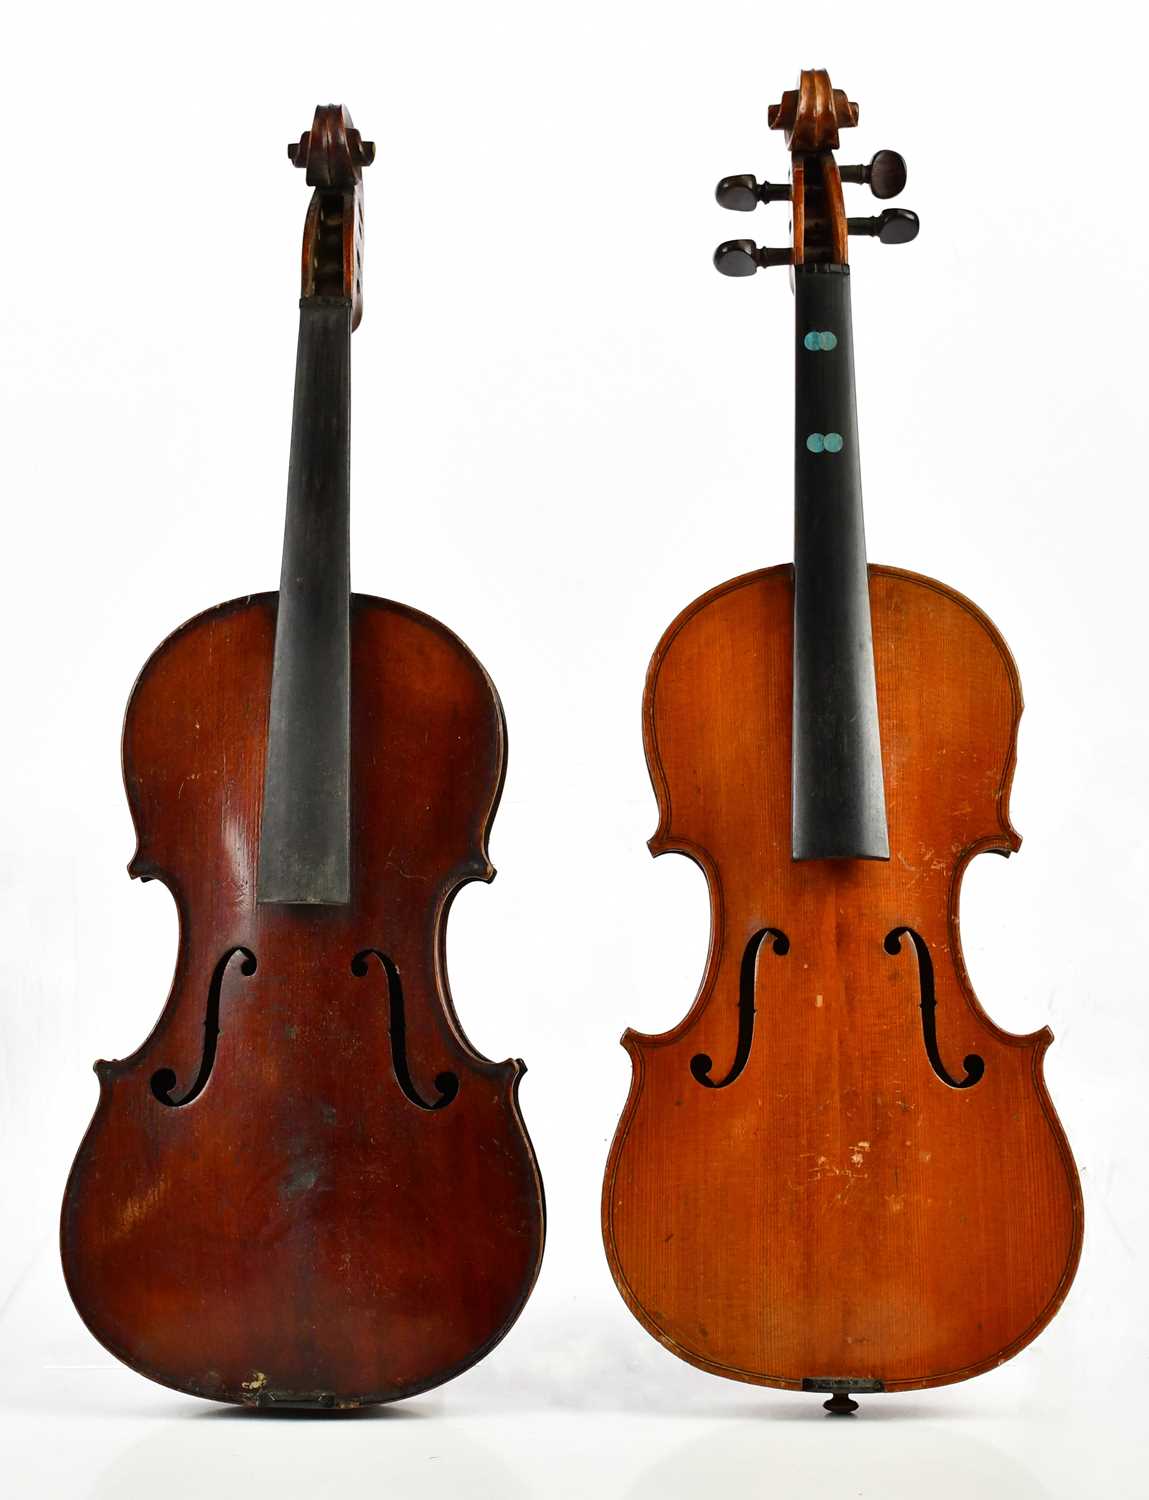 A three-quarter size 'Medio-Fino' violin with one-piece back length 33cm, with another three-quarter